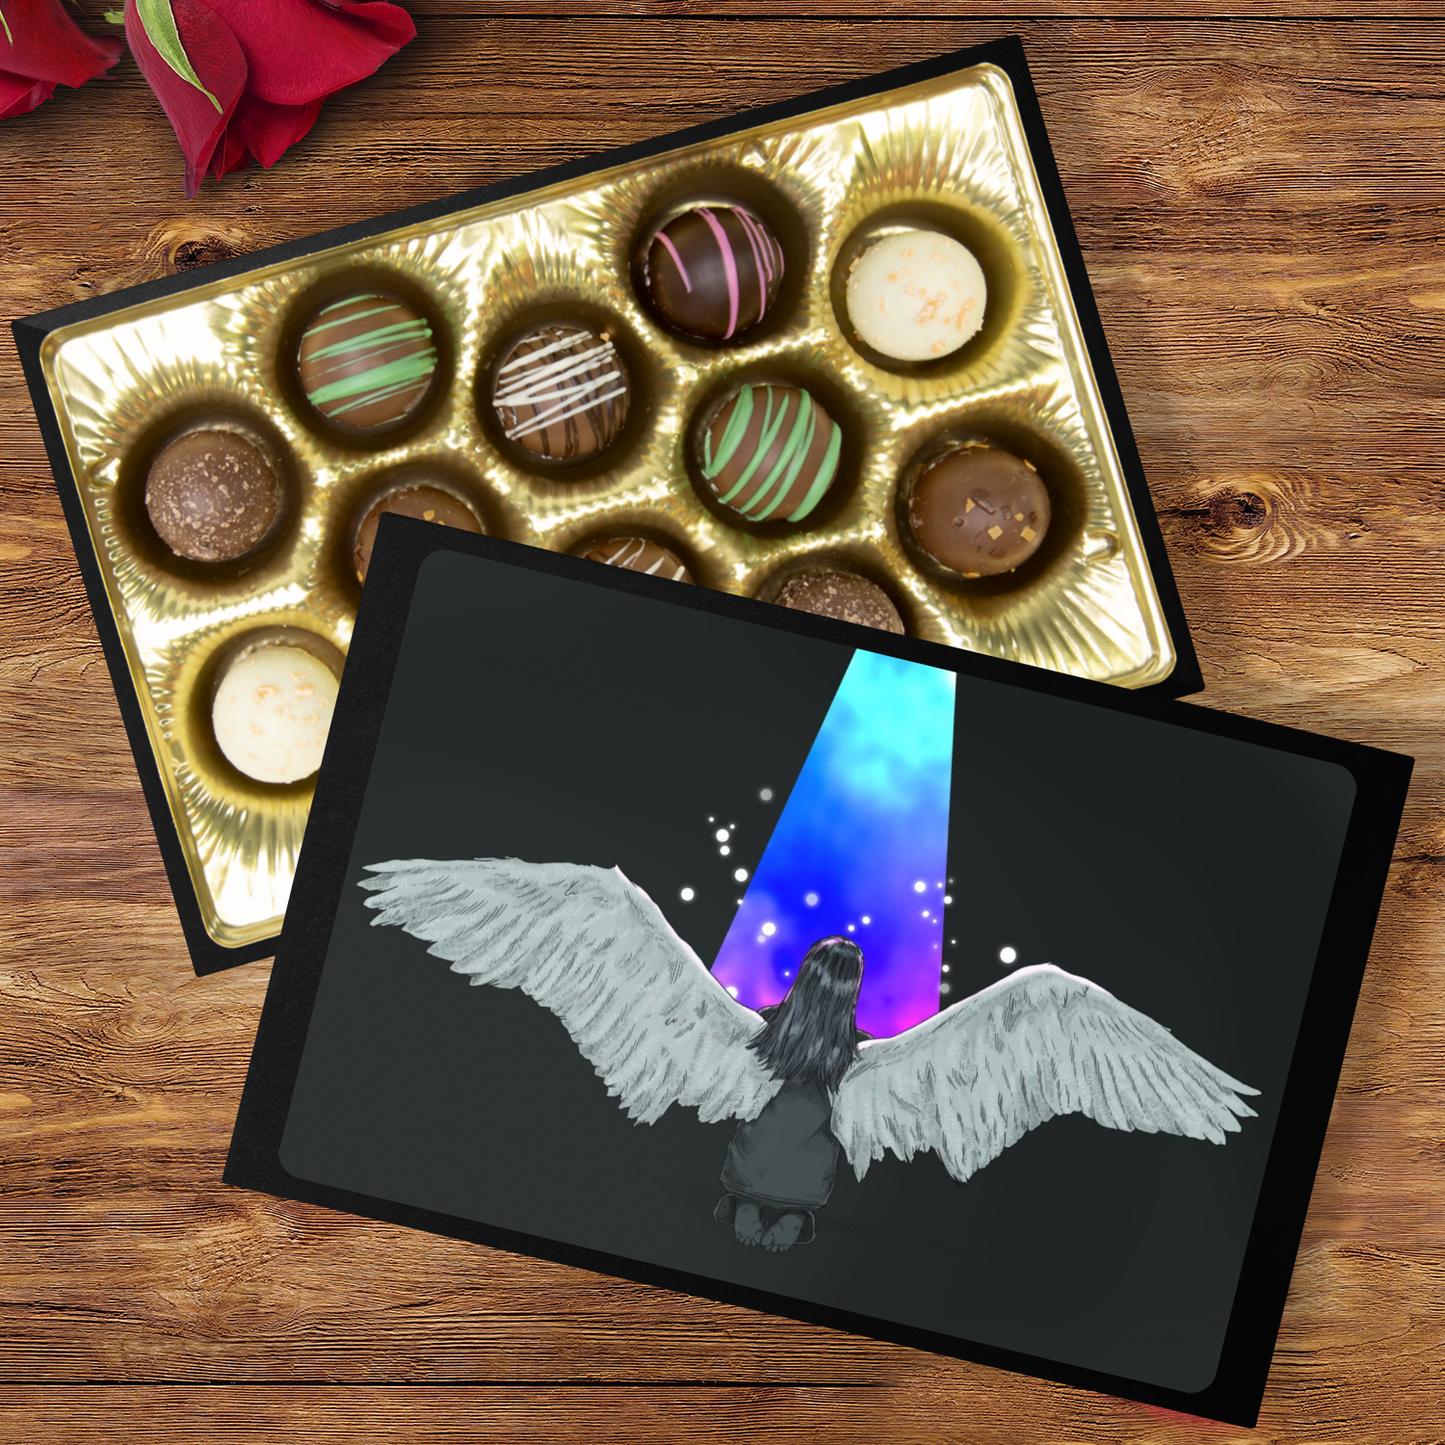 Handmade Chocolate Truffles with "Find Your Light" Box